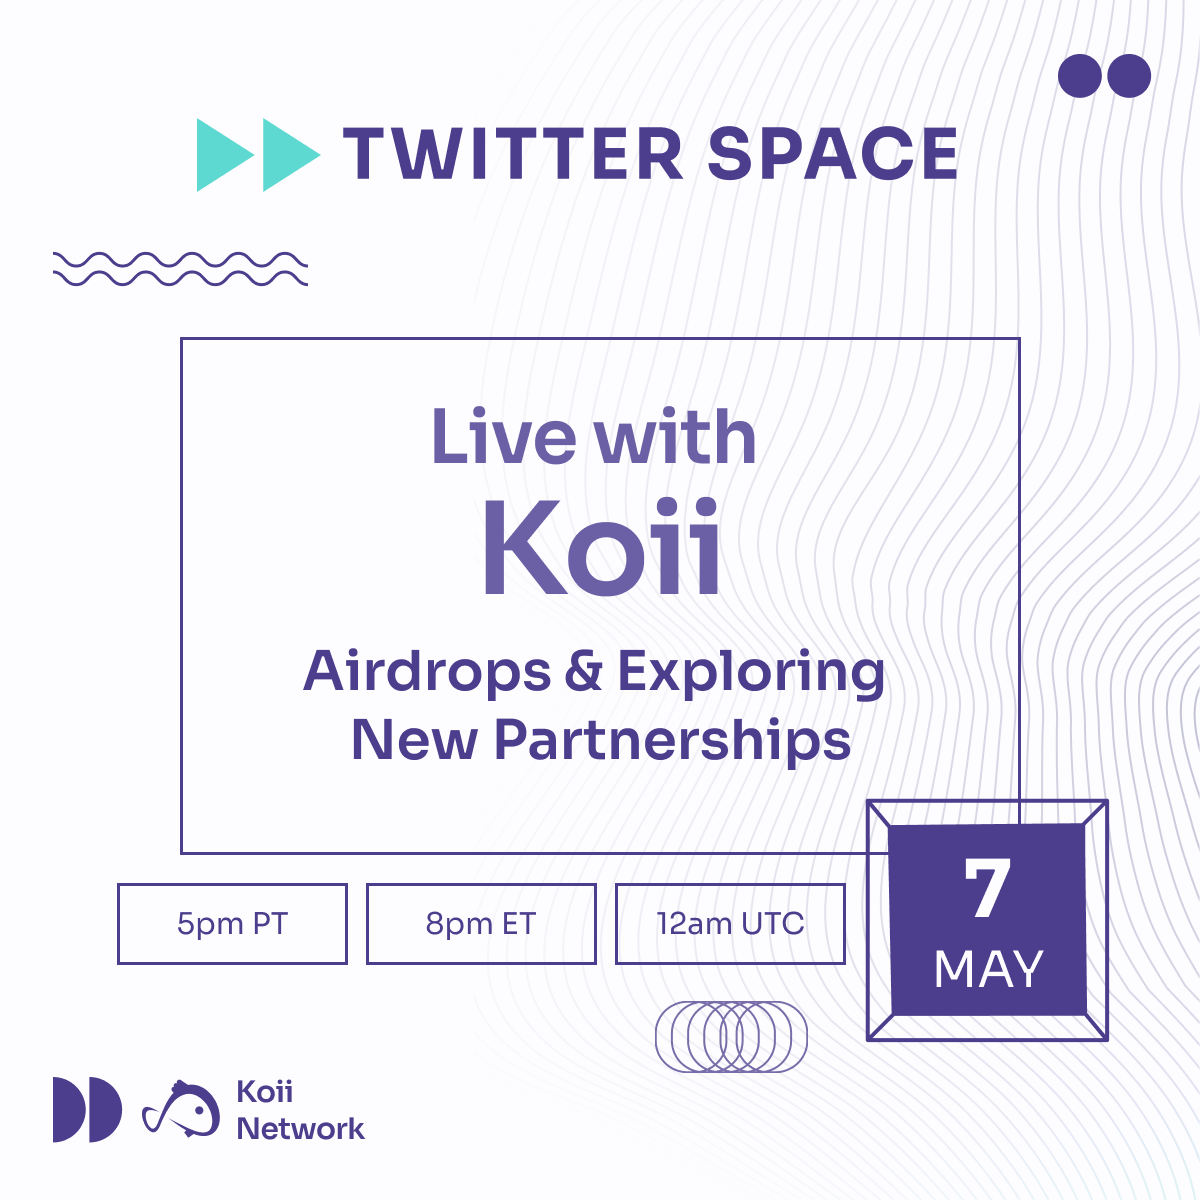 🎙️ Join our space for an exciting discussion on Airdrops and Exploring New Partnerships hosted by @theblondebroker and @action_ceo! Speakers: @al_from_koii @Wei_ADot @Adot_web3 @girl_intheverse 🗓️ May 7th, 8 PM EST / 12 AM UTC Set your reminders below. We're excited to have